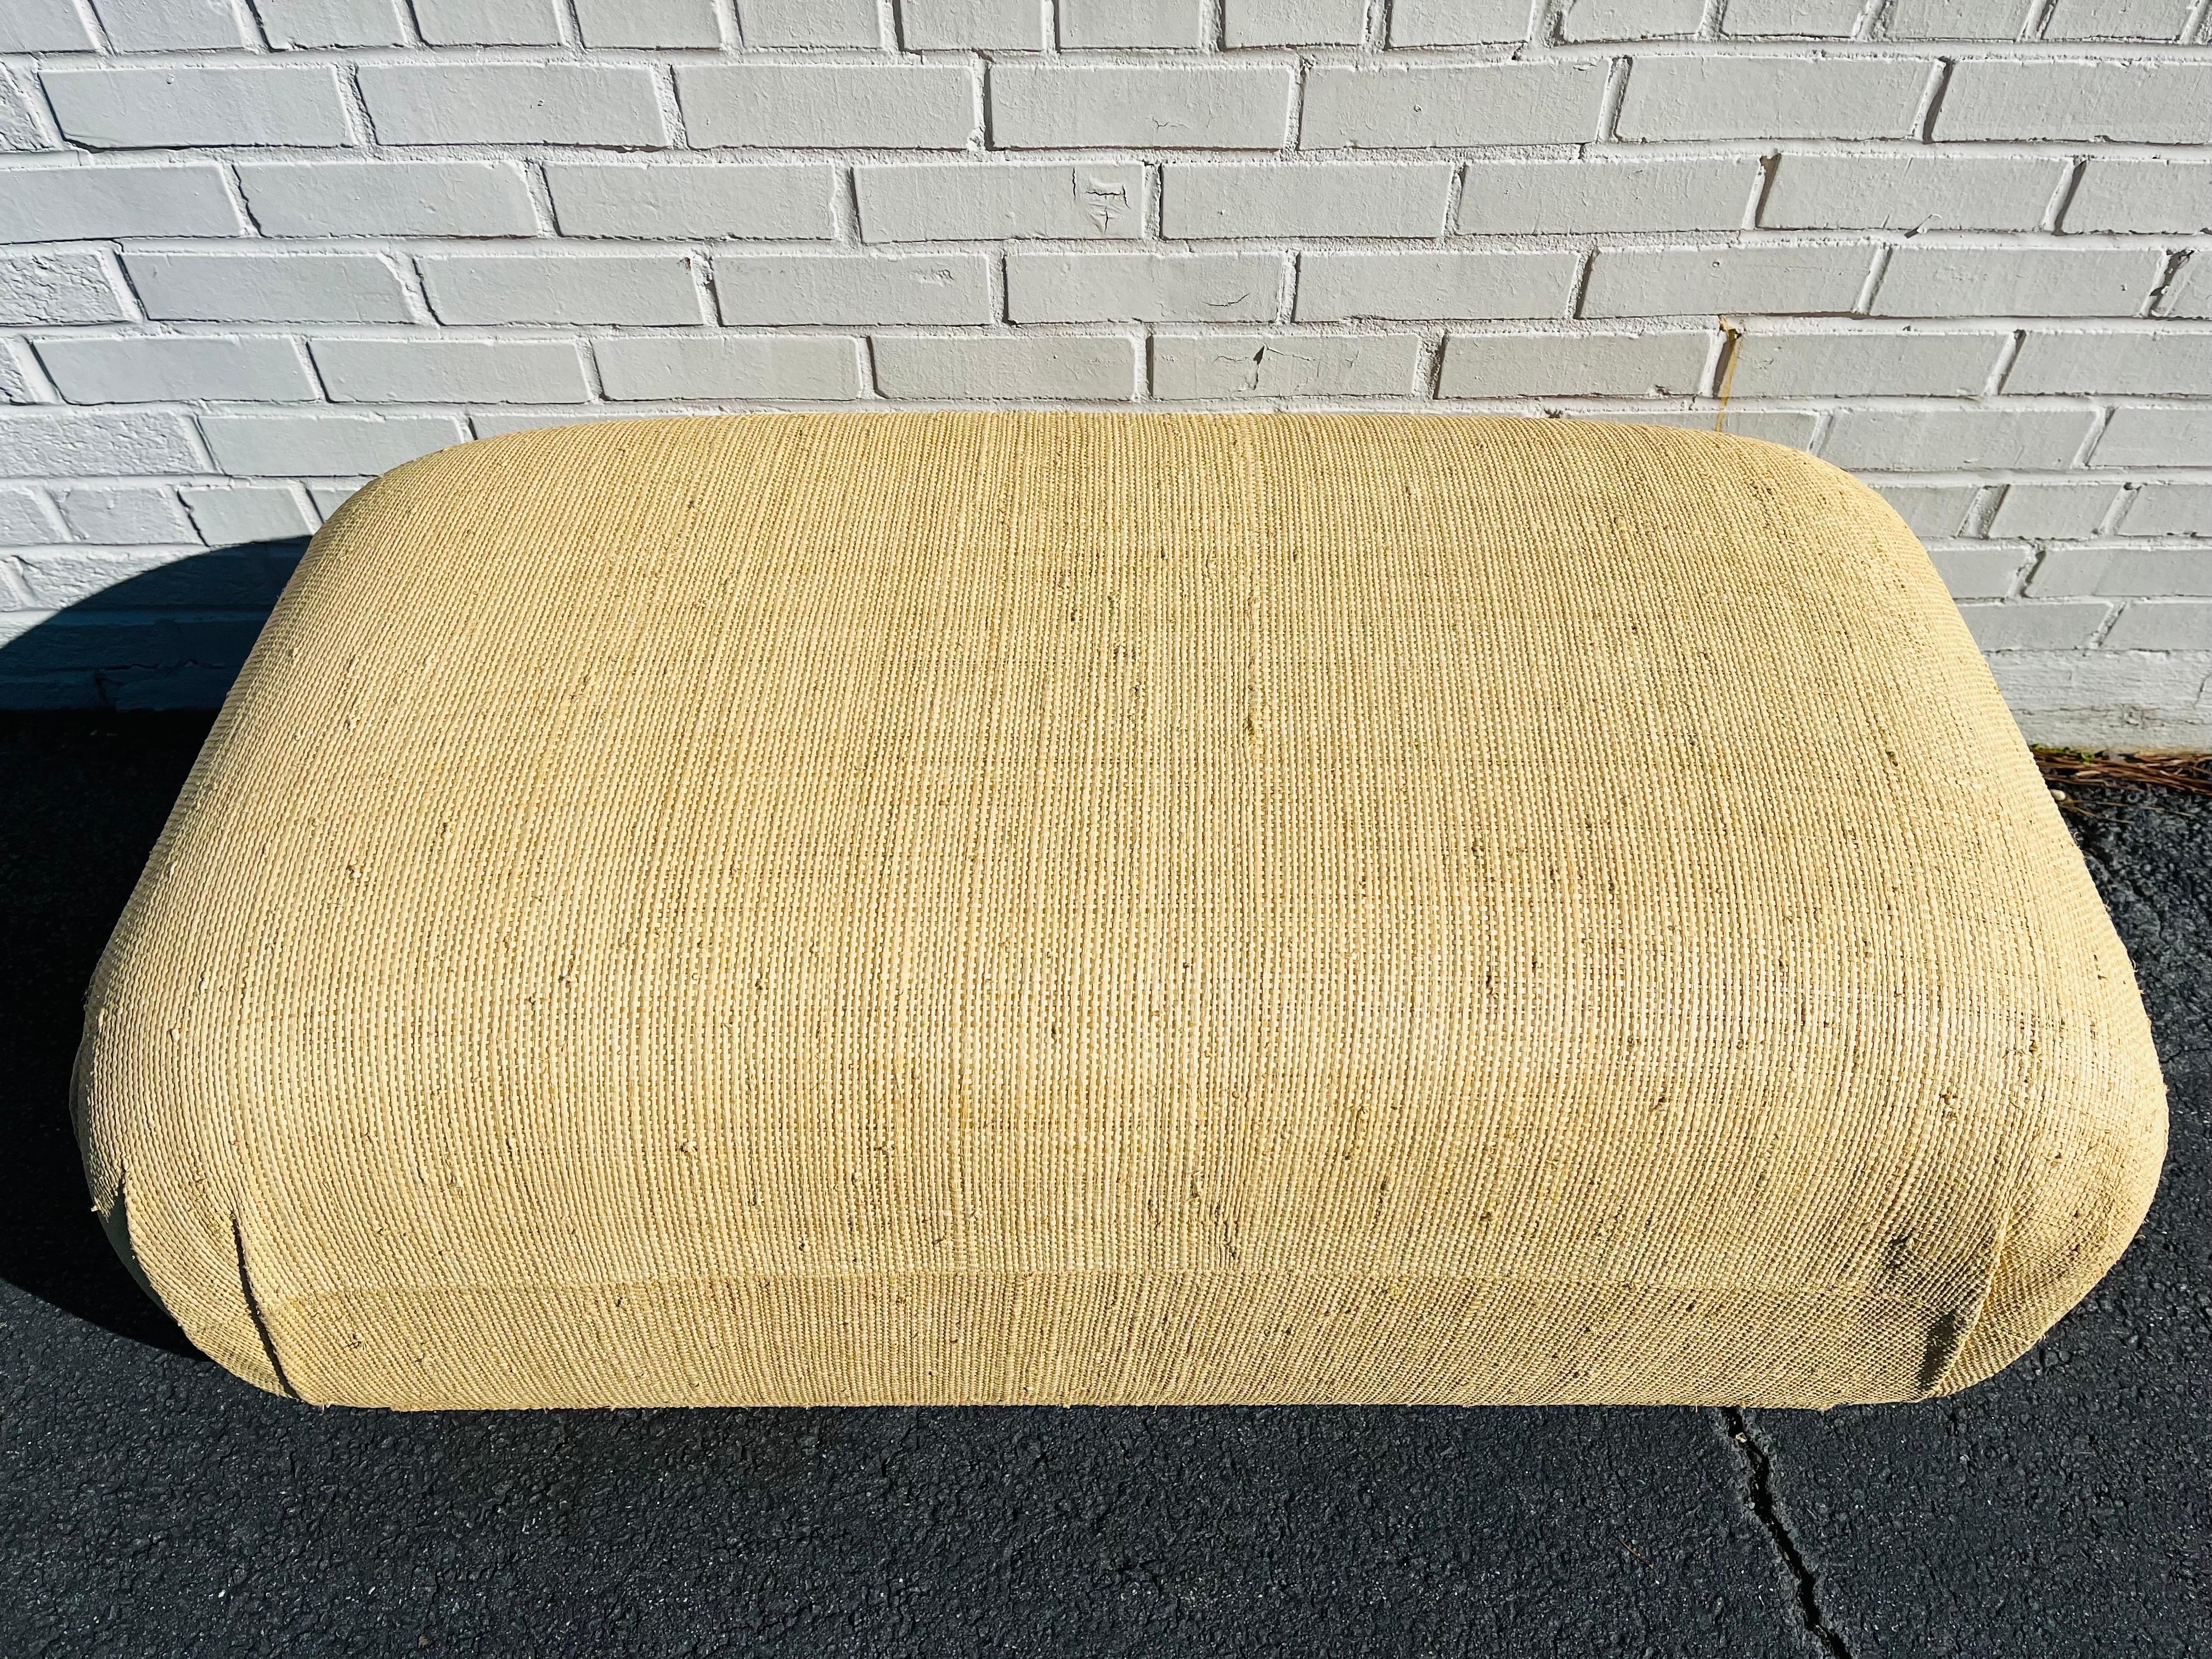 20th Century Contemporary Springer Style Grasscloth Upholstered Large Pouf Souffle Ottoman